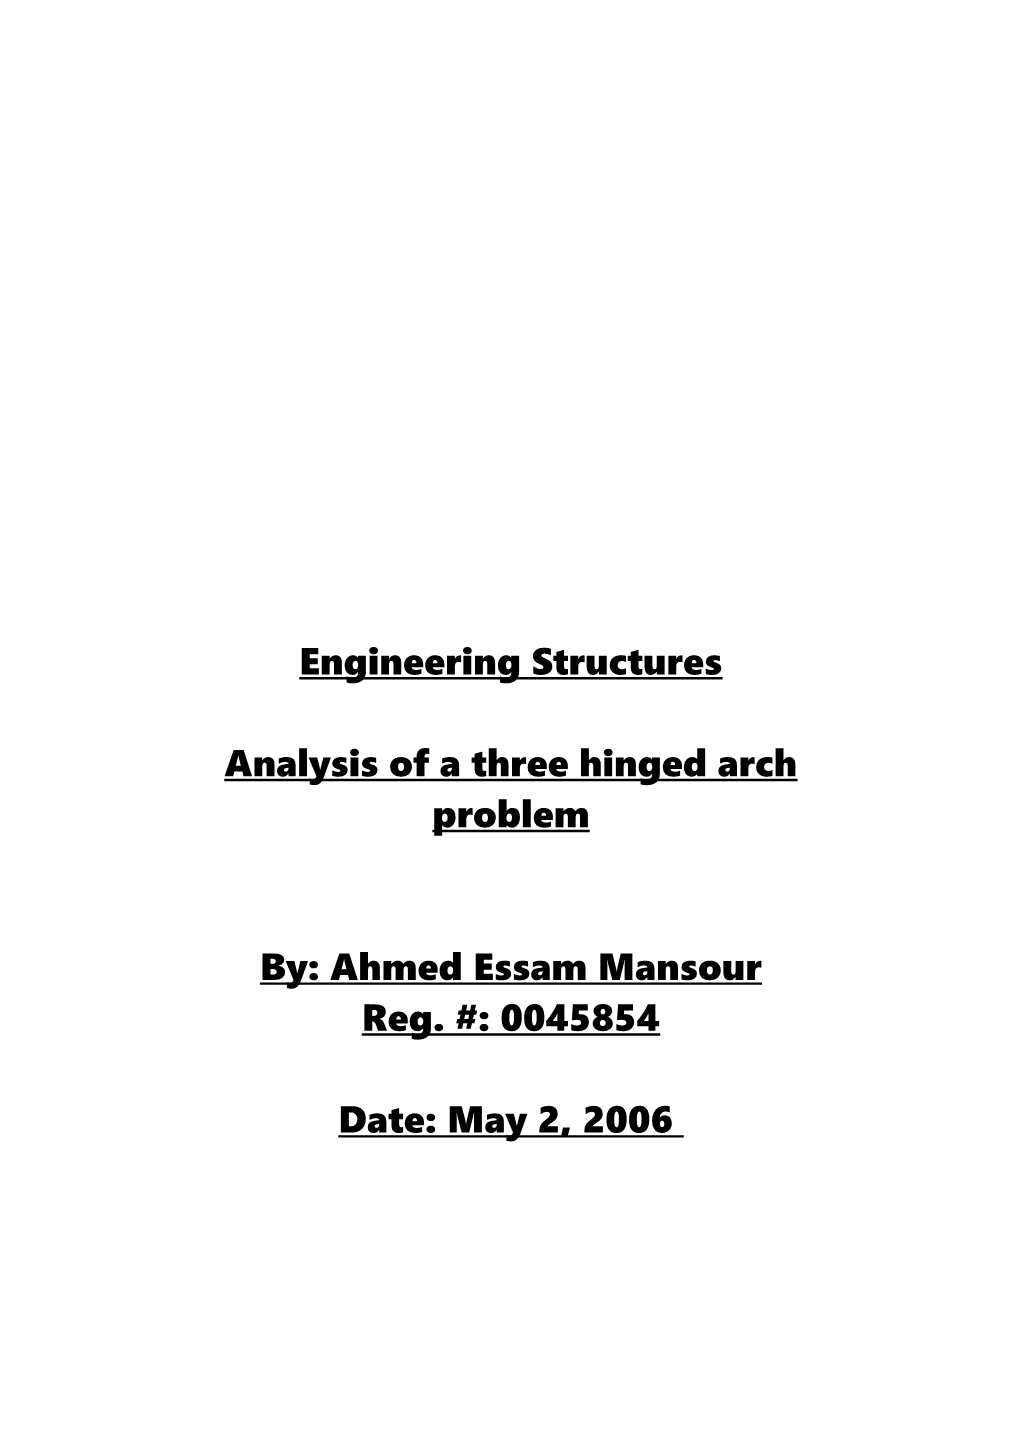 Analysis of a Three Hinged Arch Problem